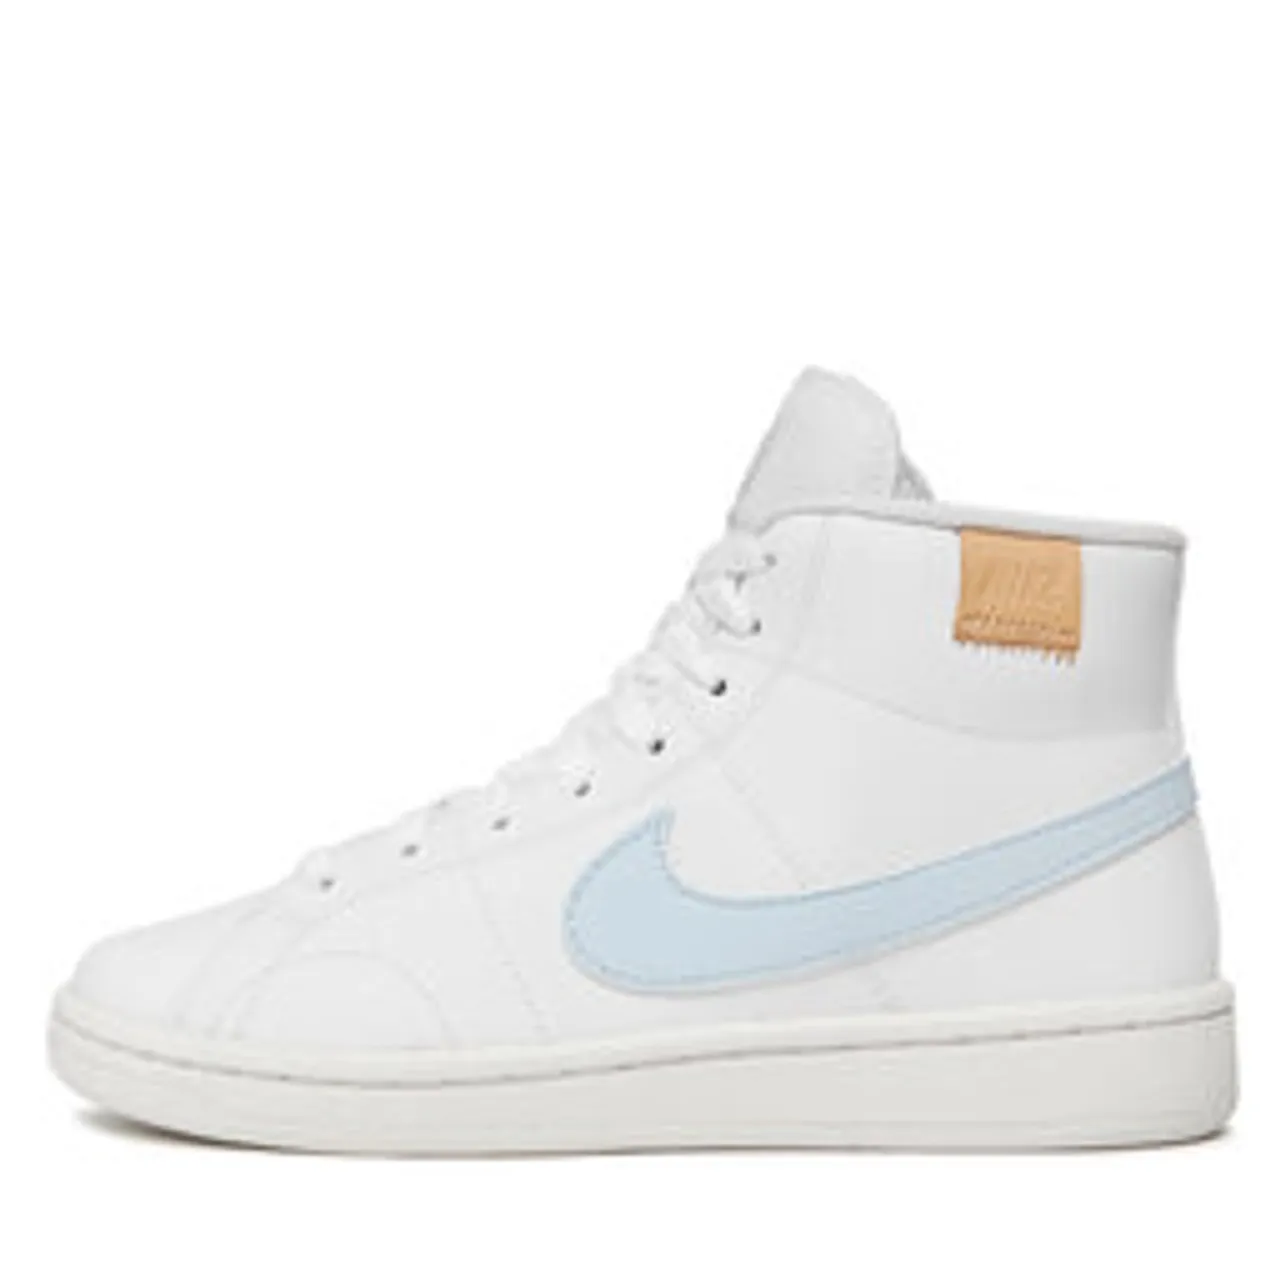 Sneakers Nike Court Royale 2 Mid CT1725 106 Weiß